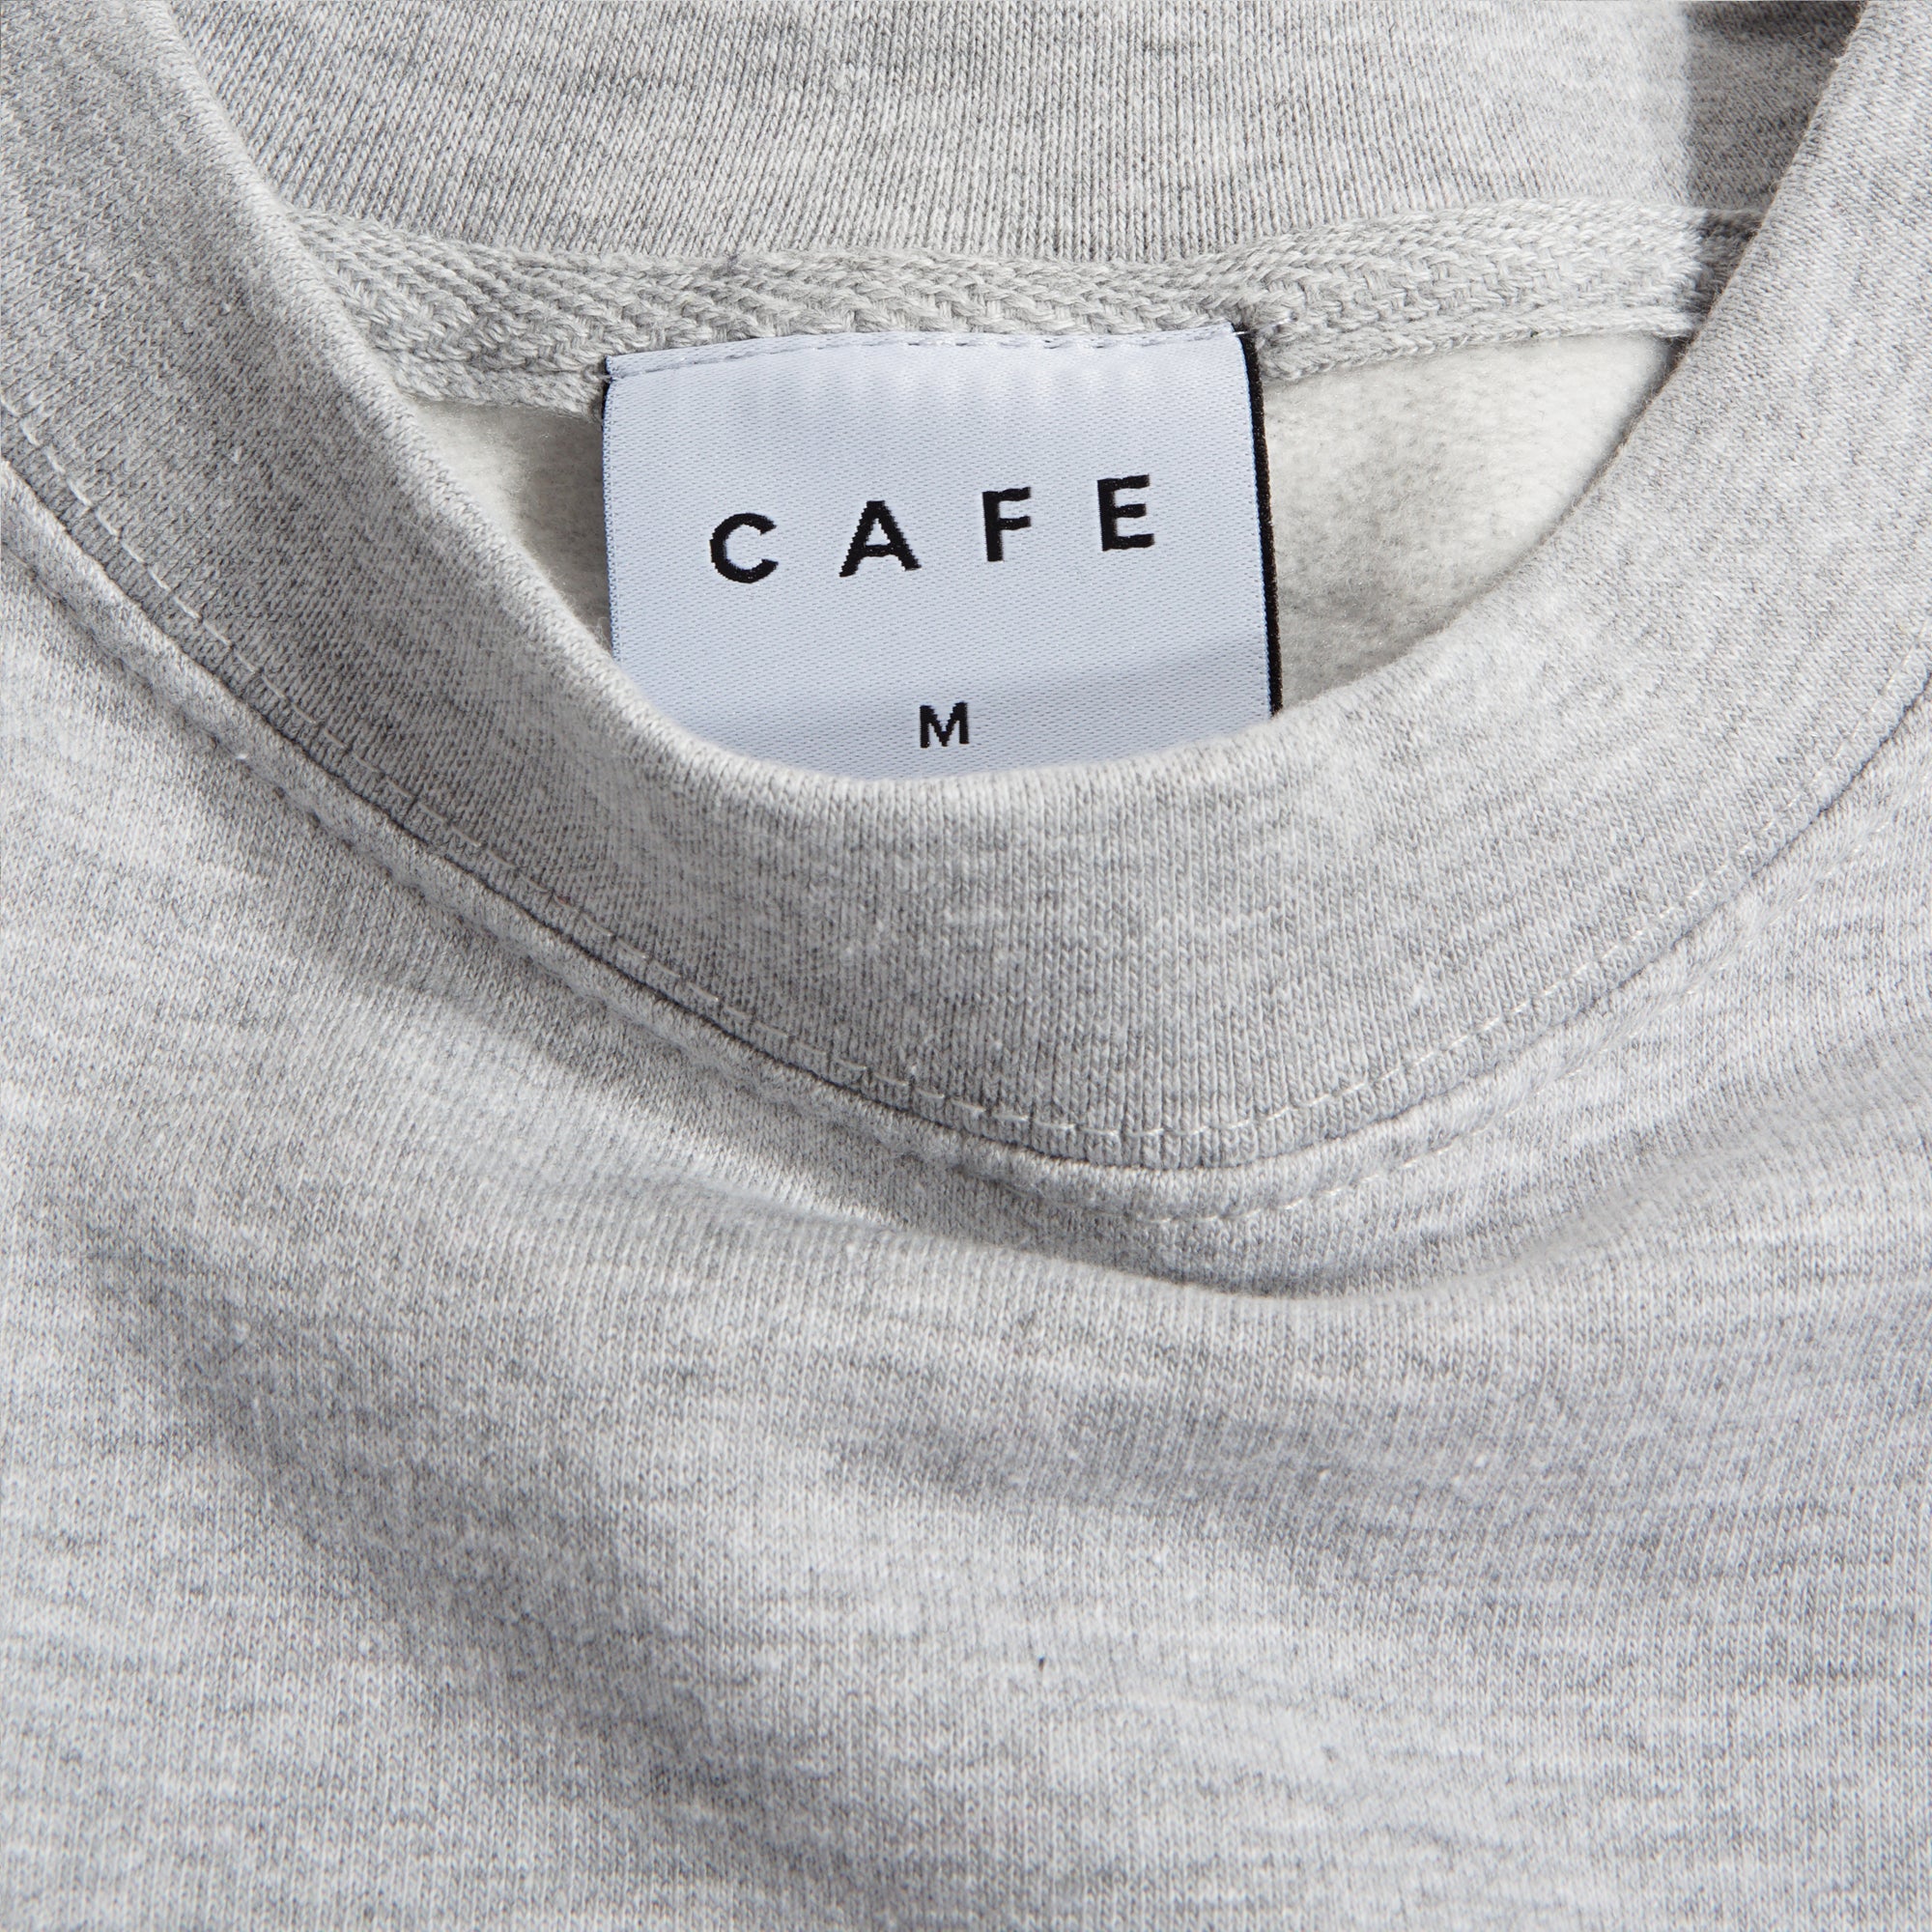 Skateboard Cafe Suited Embroidered Crew Heather Grey